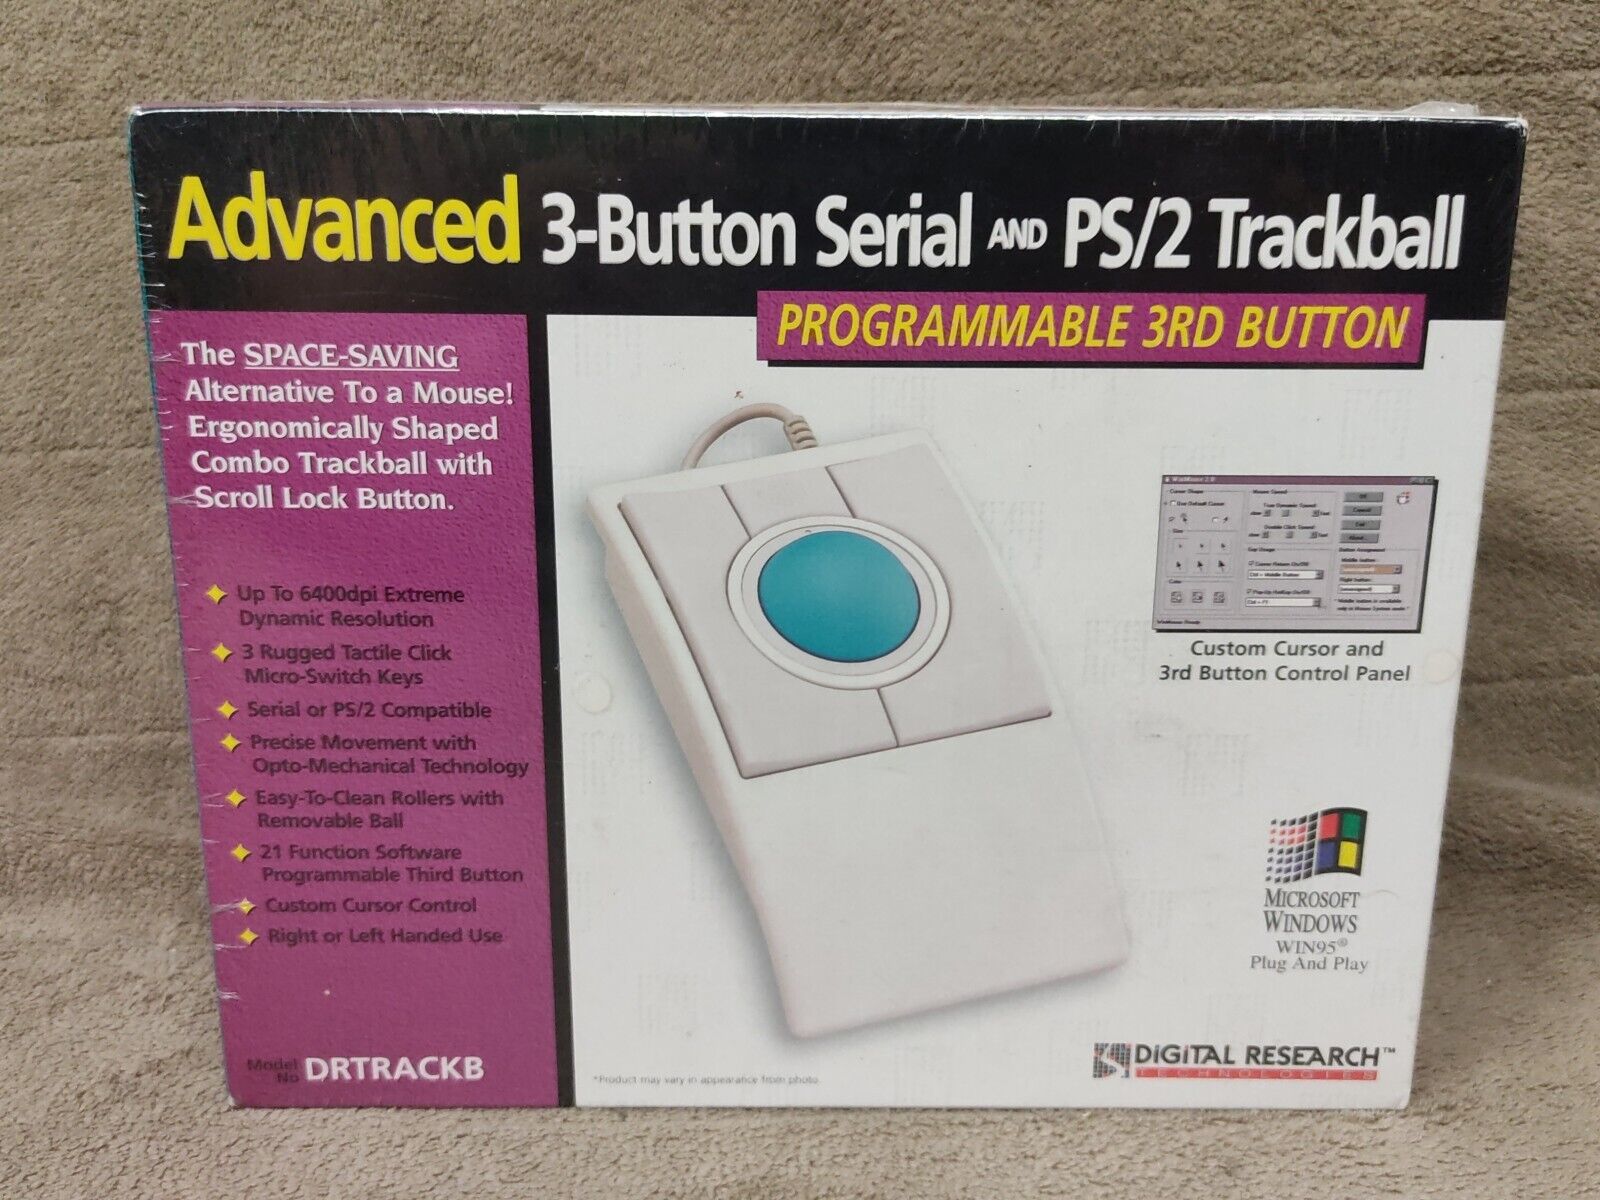 NEW*Digital Research Technologies 3-Button Serial PS/2 Trackball Mouse DRTRACKB